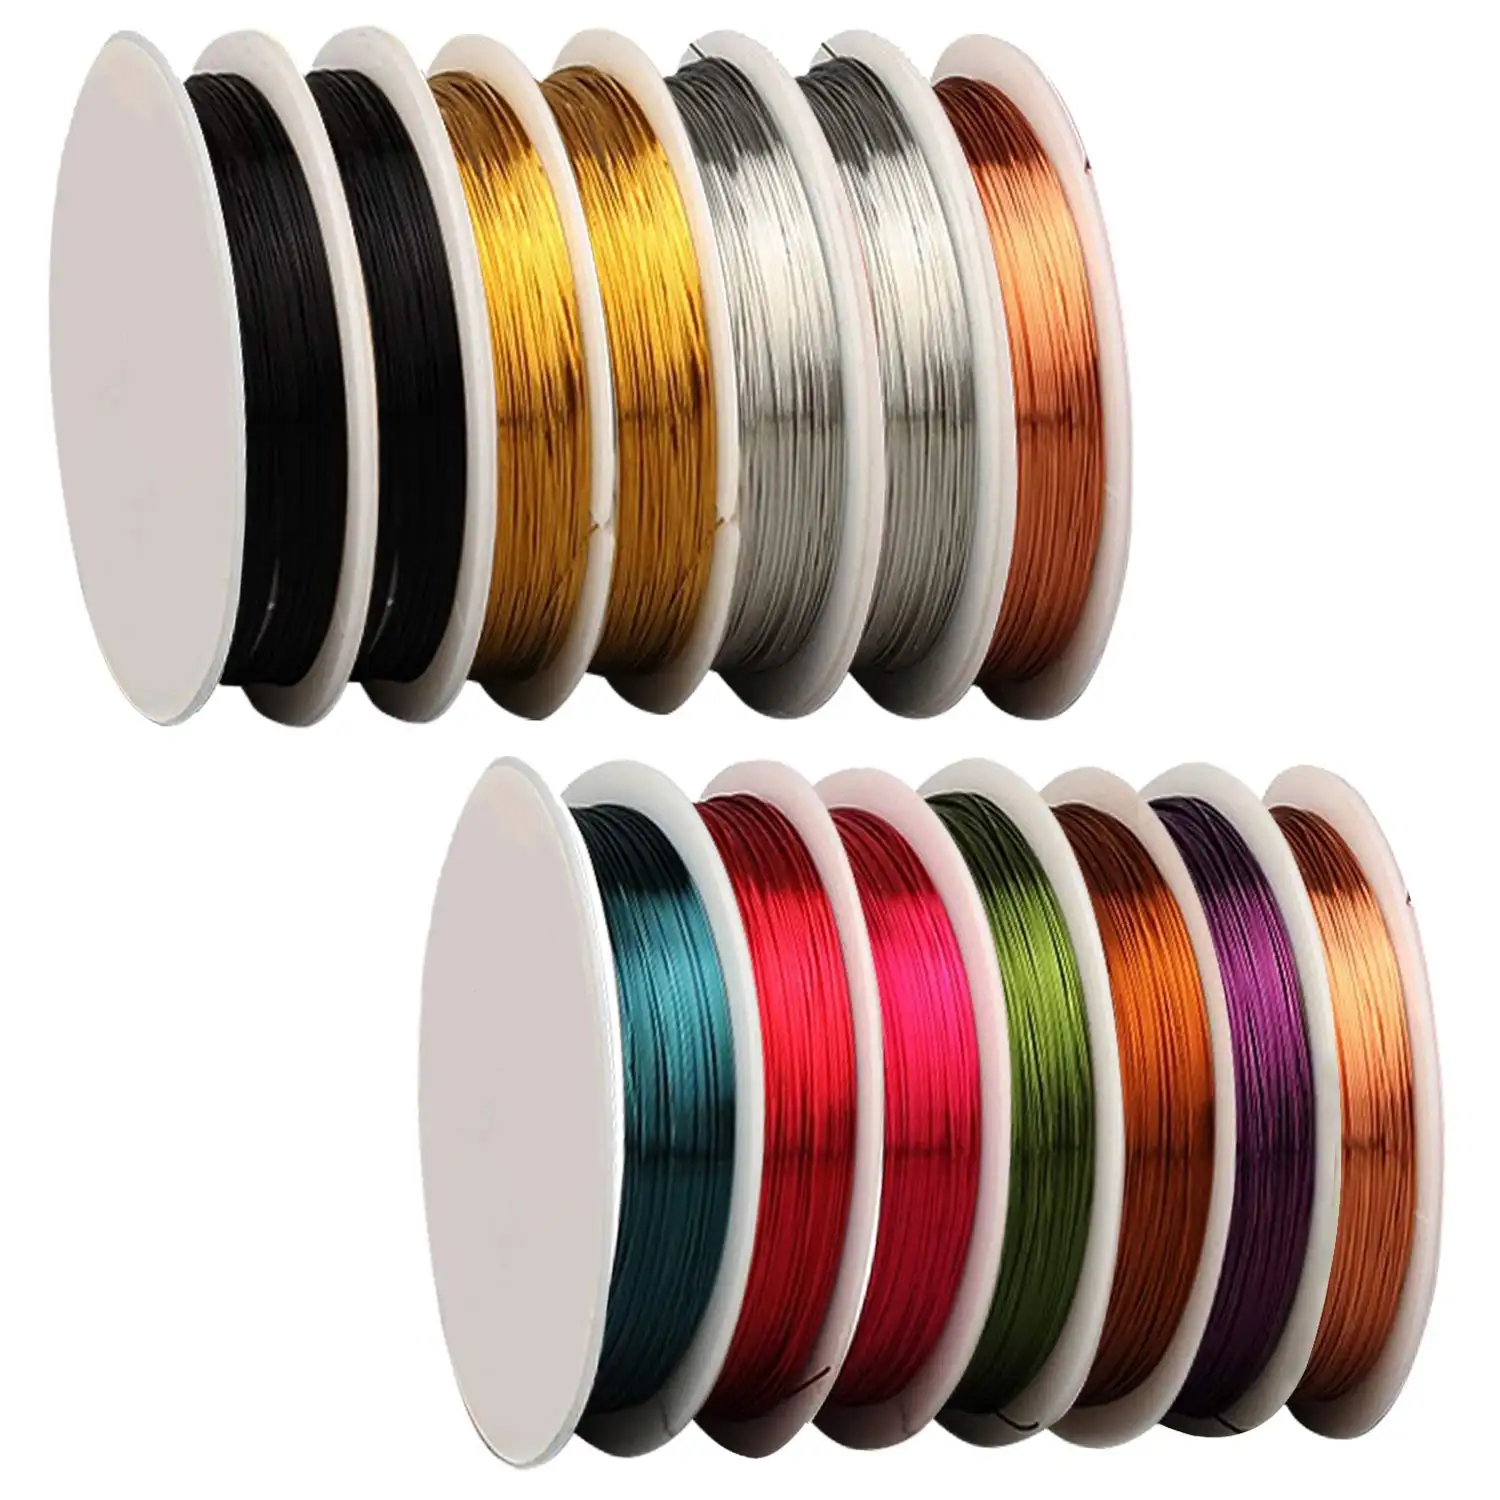 Jewelry Wire for Jewelry Making, Craft Wire Tarnish Resistant Copper Beading Wire for Jewelry Making Supplies and Crafts